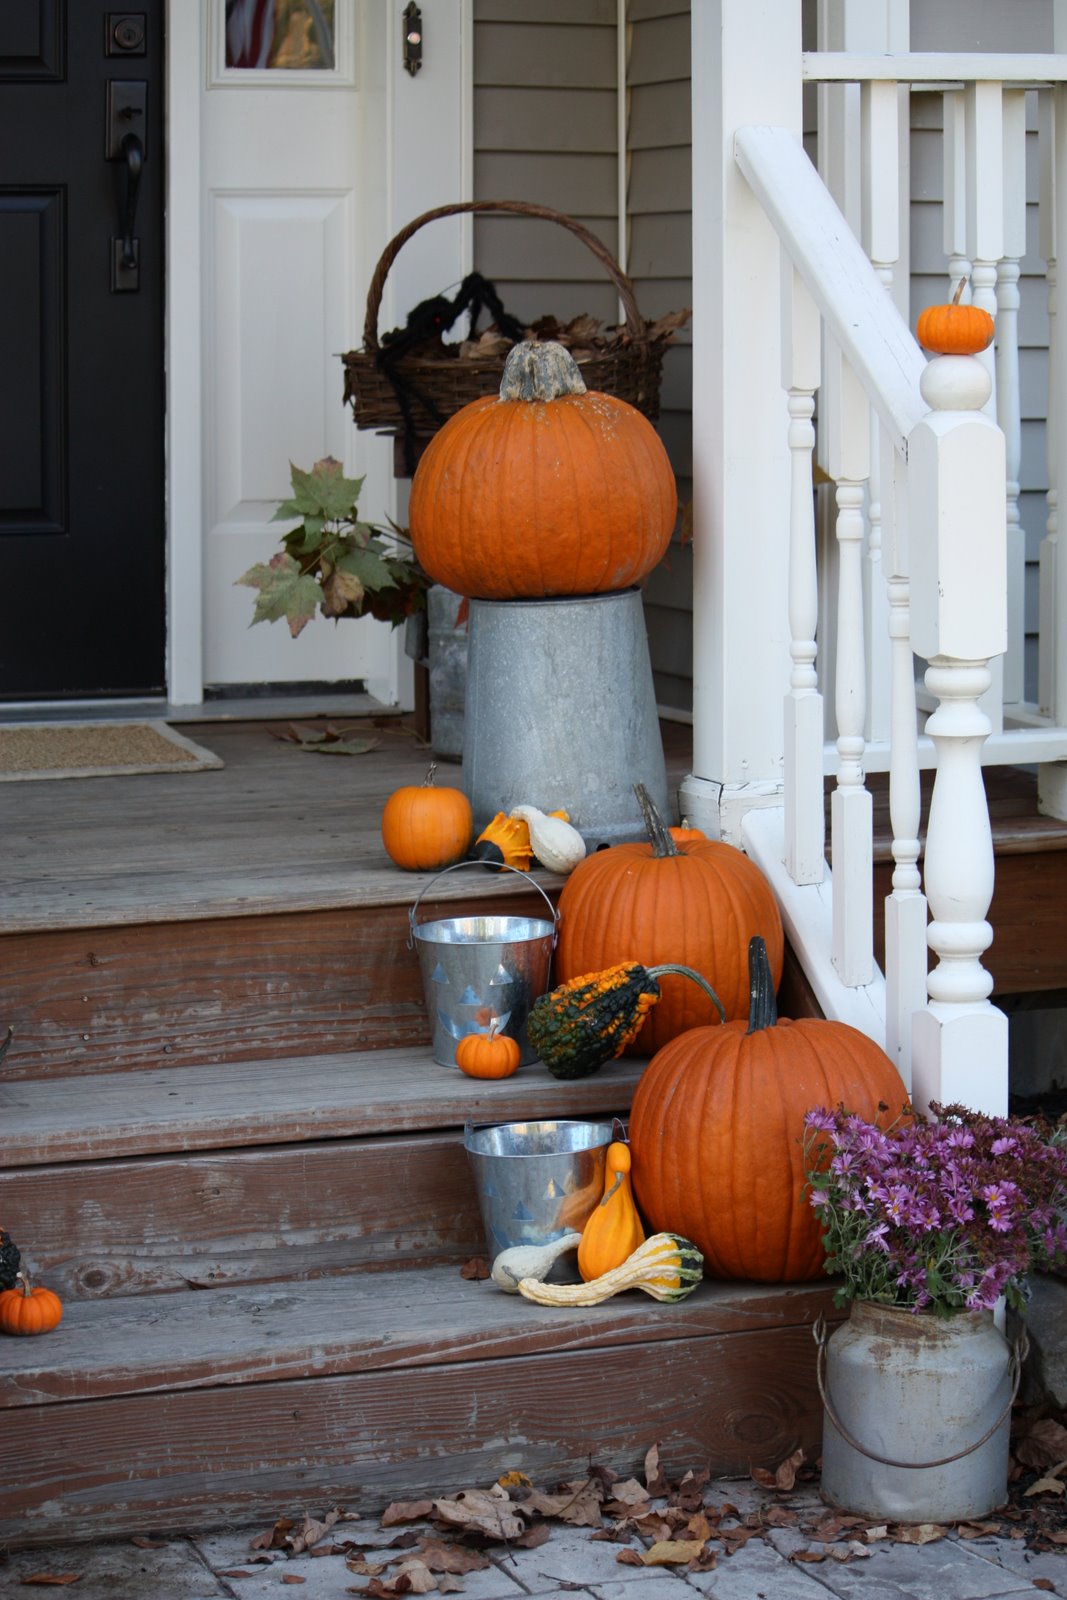 Home Outside Decor : Fall Porch Decor with Plants and Pumpkins - Unskinny Boppy / We've made it easy for you to shop for all your inside n outside decor, all in one stop!!